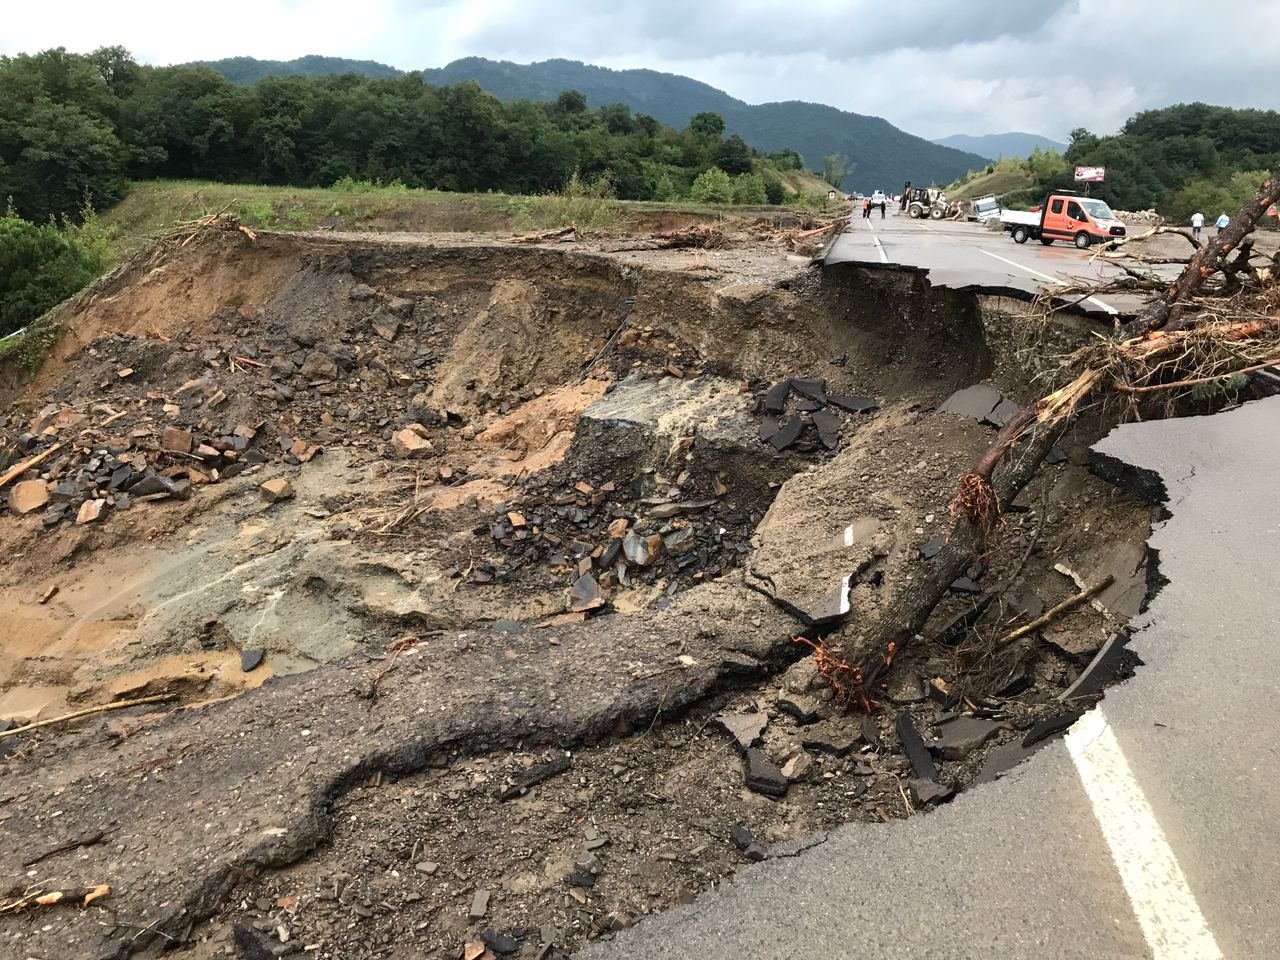 A road collapsed due to the floods in Bartın, northern Turkey, Aug. 11, 2021. (AA Photo)